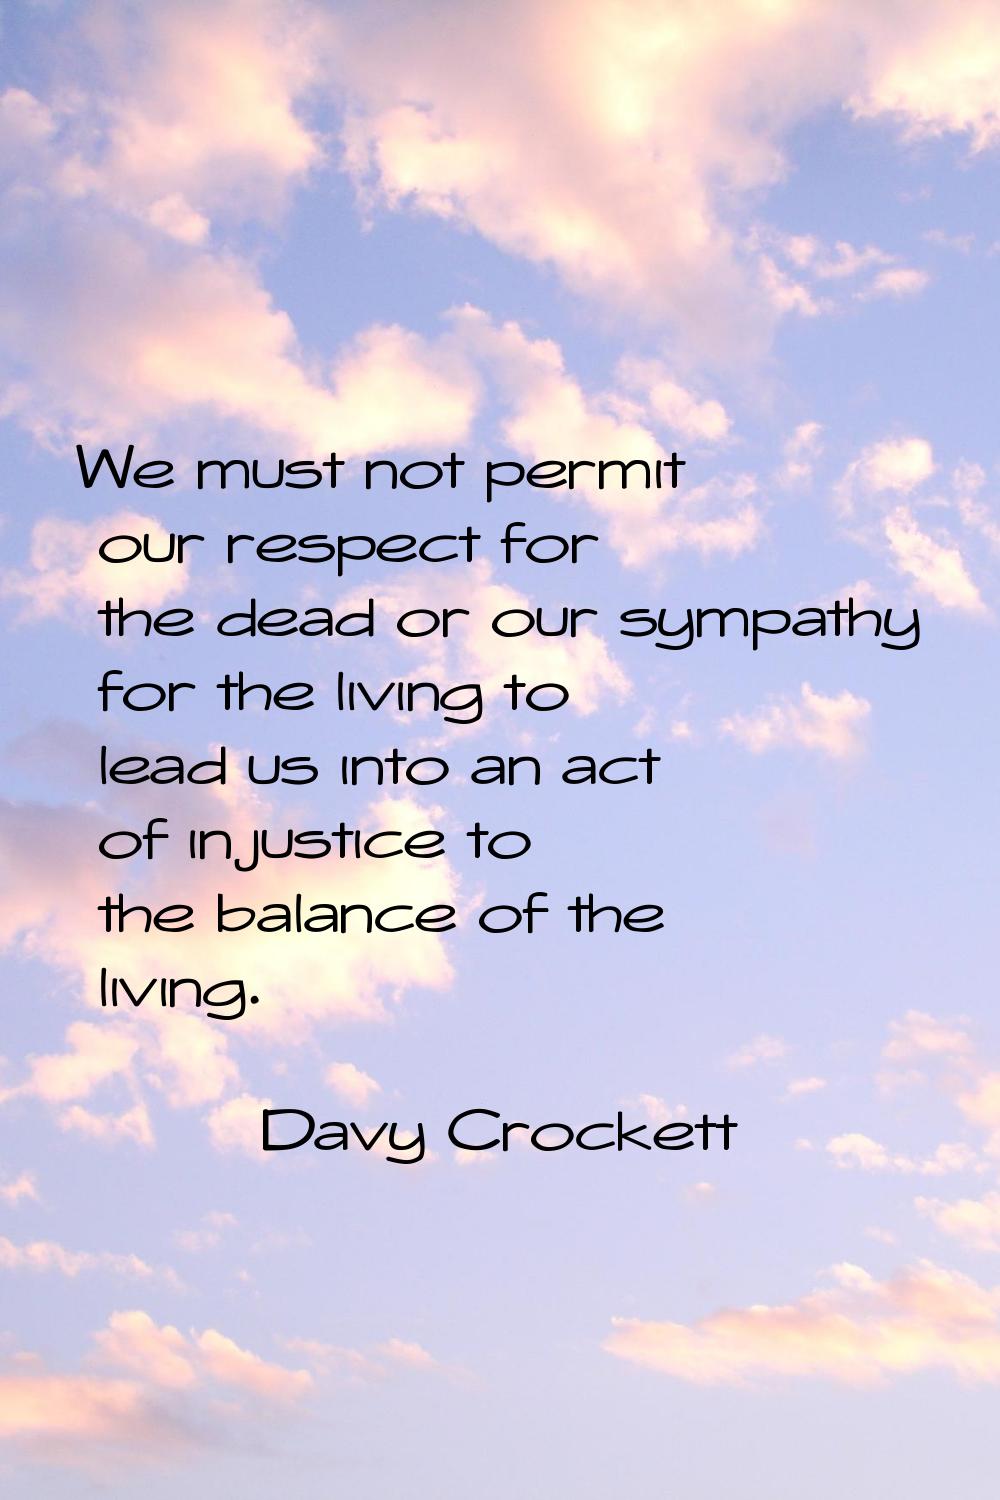 We must not permit our respect for the dead or our sympathy for the living to lead us into an act o